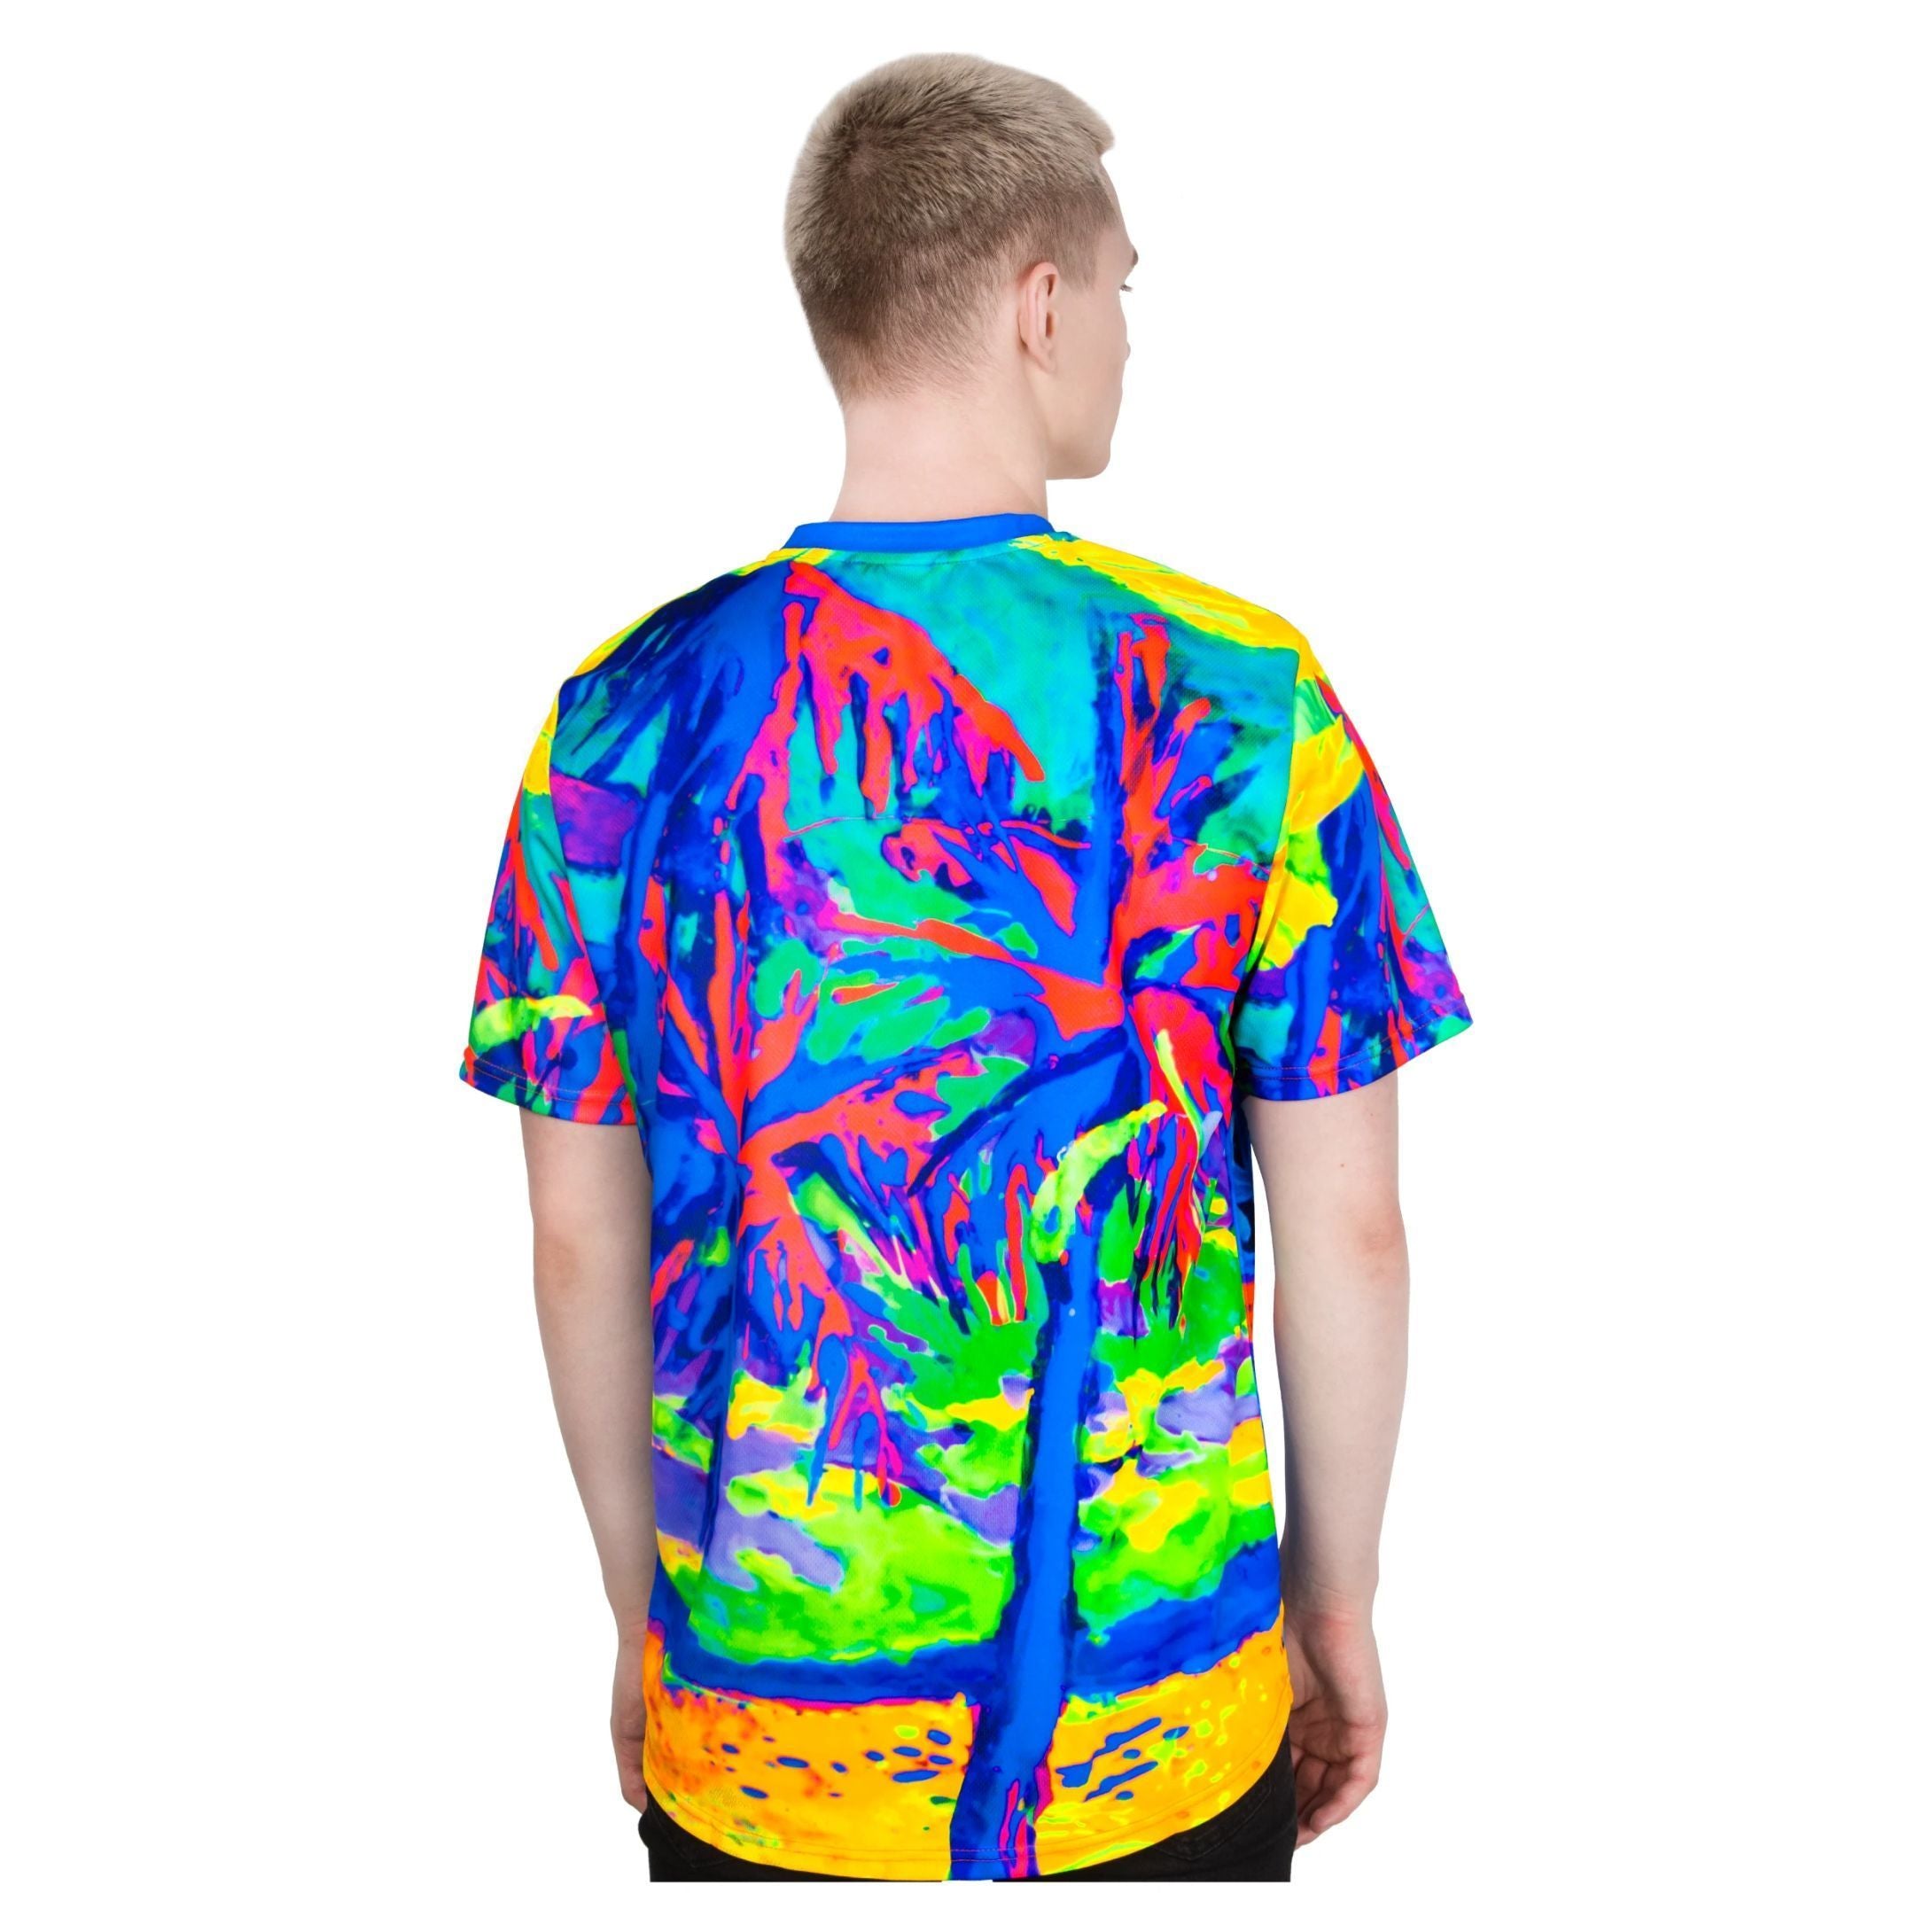 Neon Print Shirts for Women Glow in UV Fluorescent Palm Vibes ts33